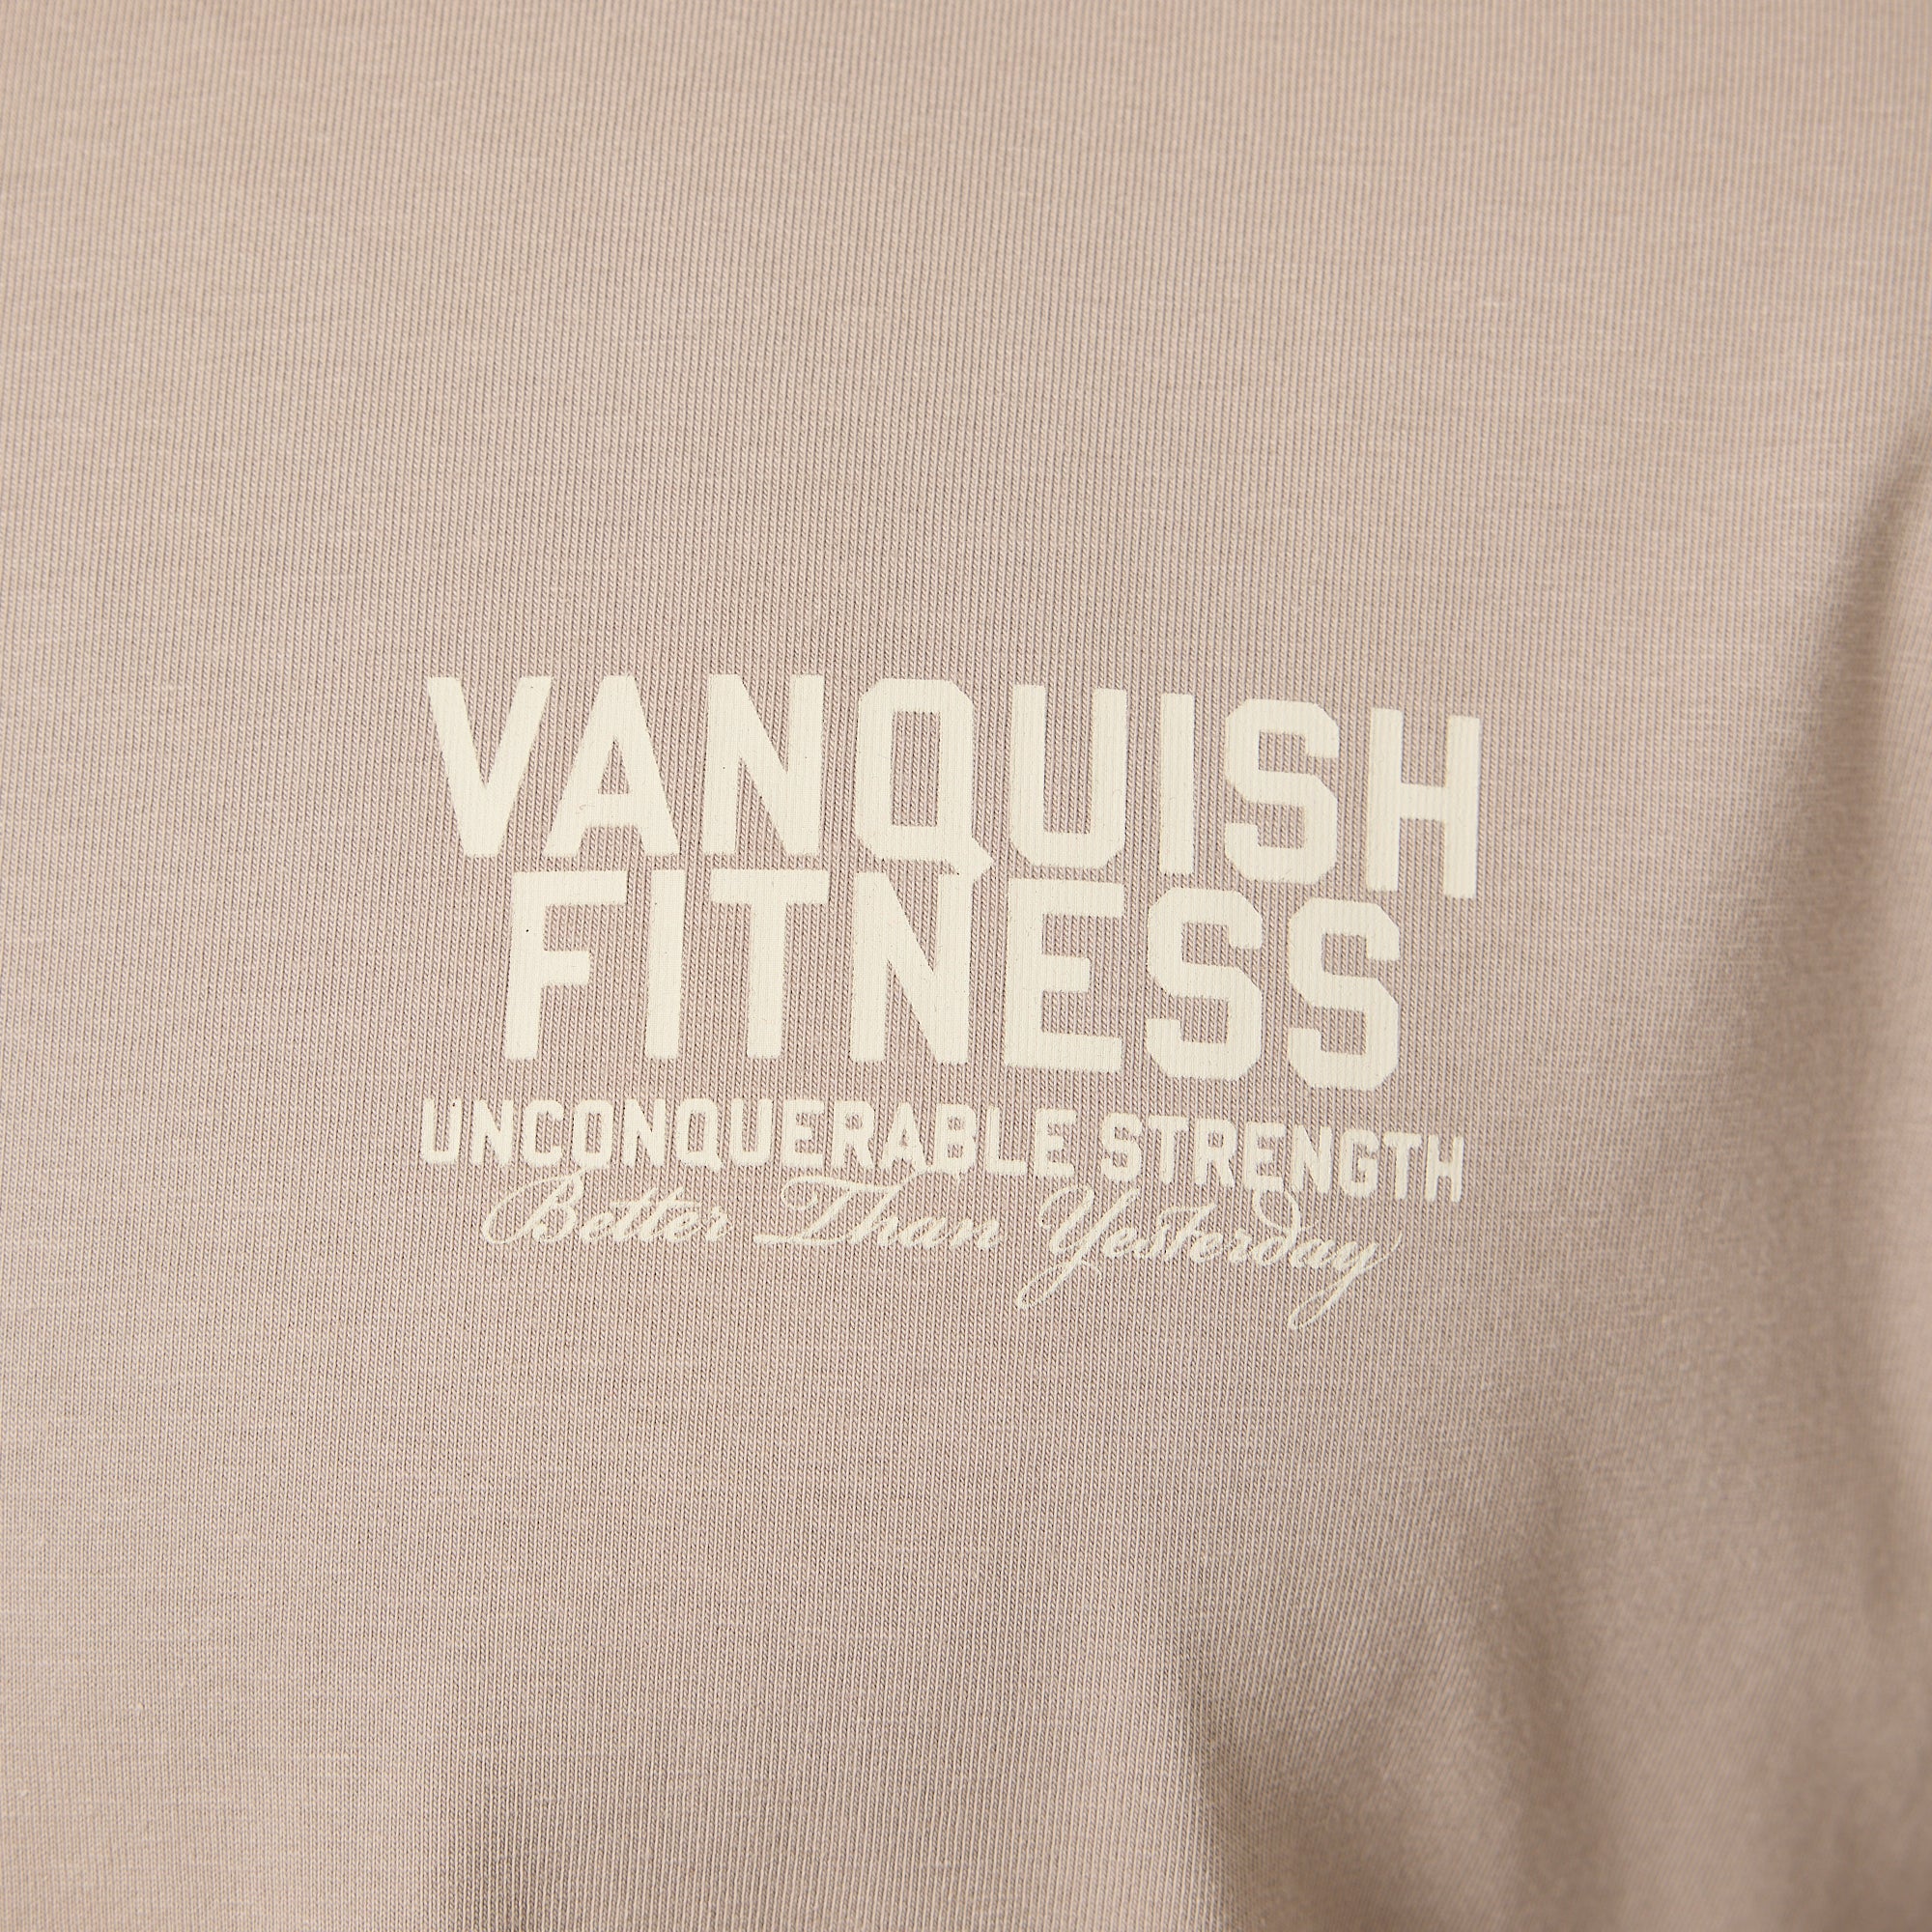 Vanquish TSP Unconquerable Strength Grey Oversized T Shirt